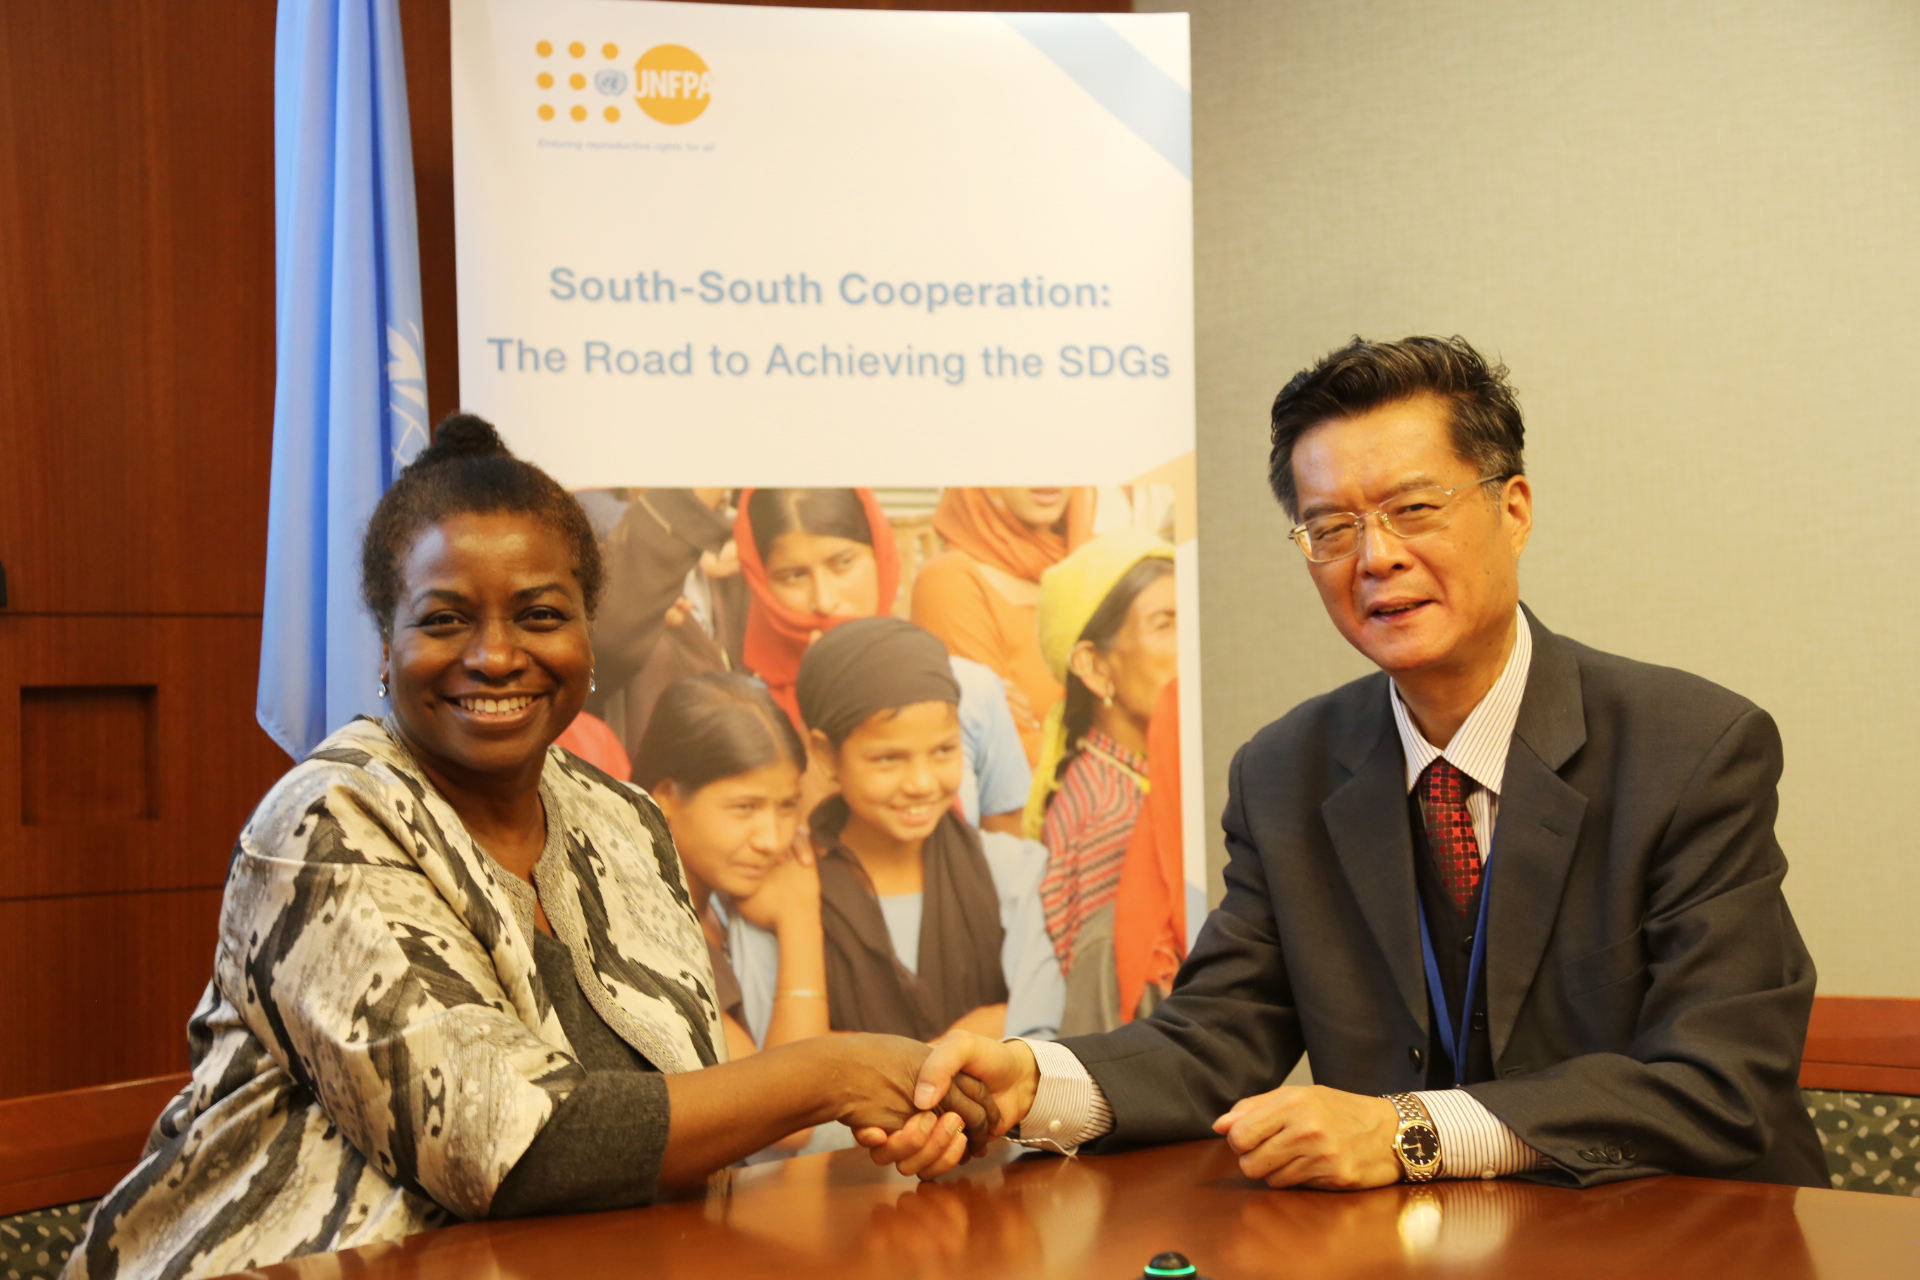 PPD and UNFPA Sign MoU to Further Promote South-South Cooperation in Population and Development